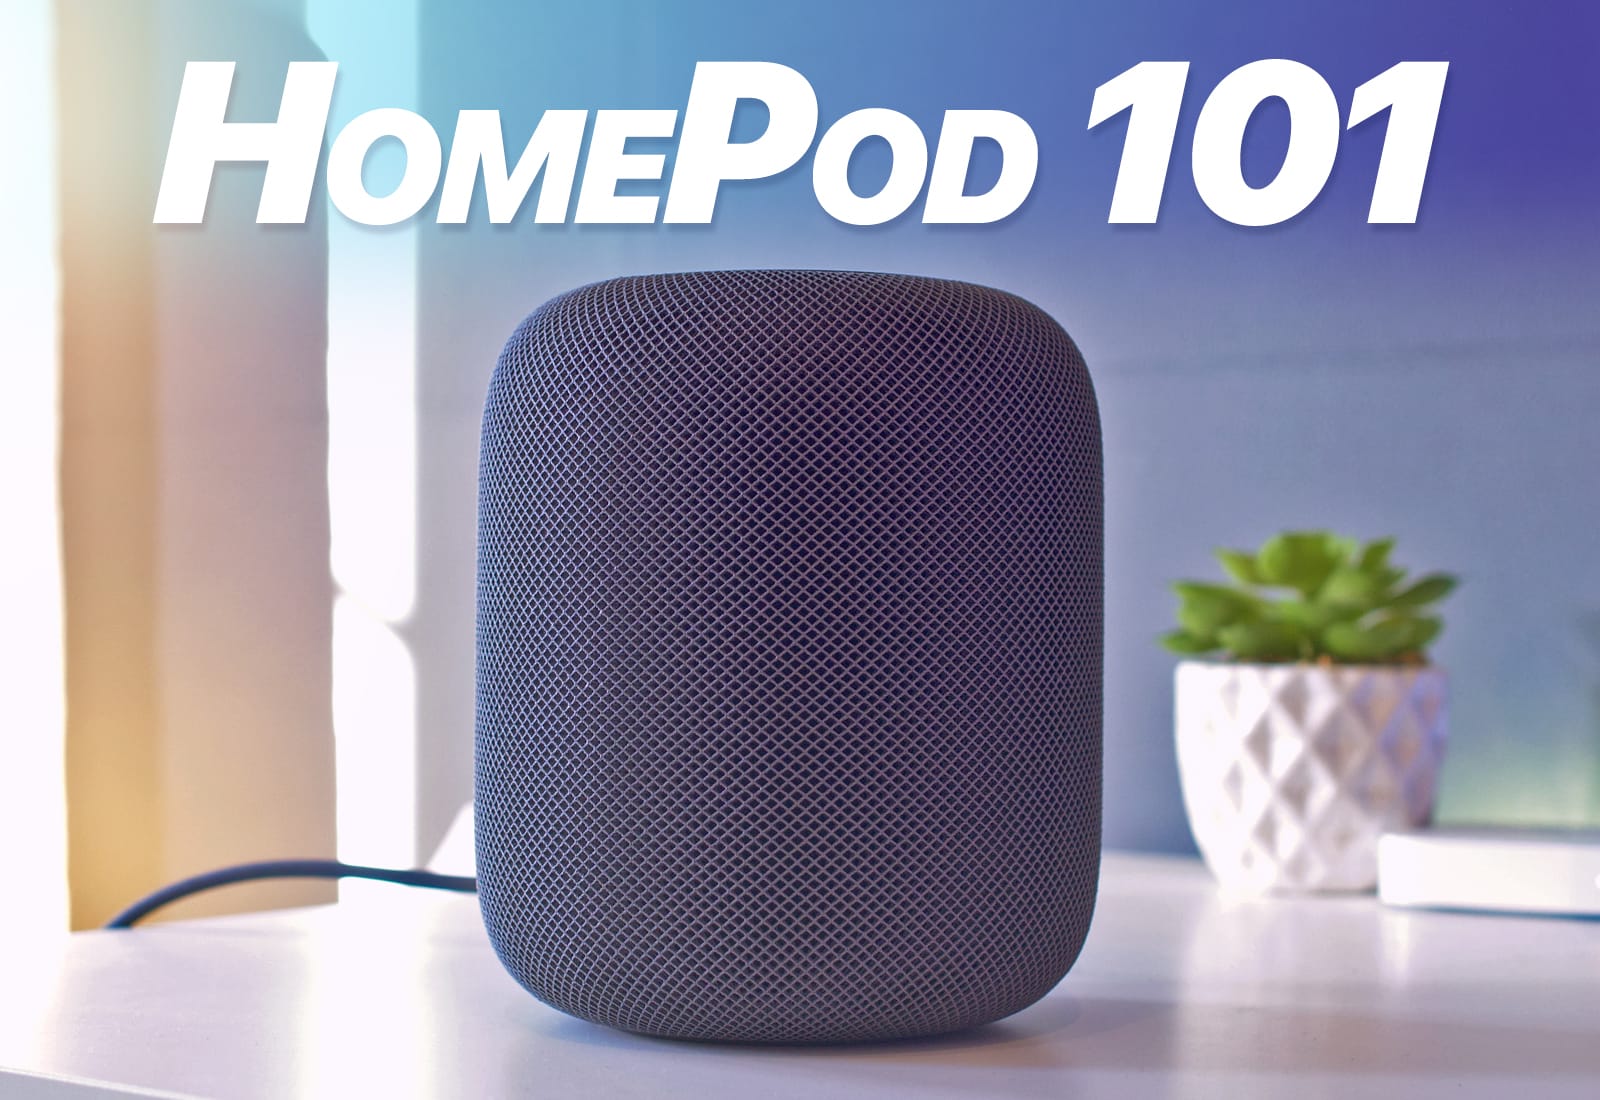 HomePod news, HomePod reviews and HomePod how-tos